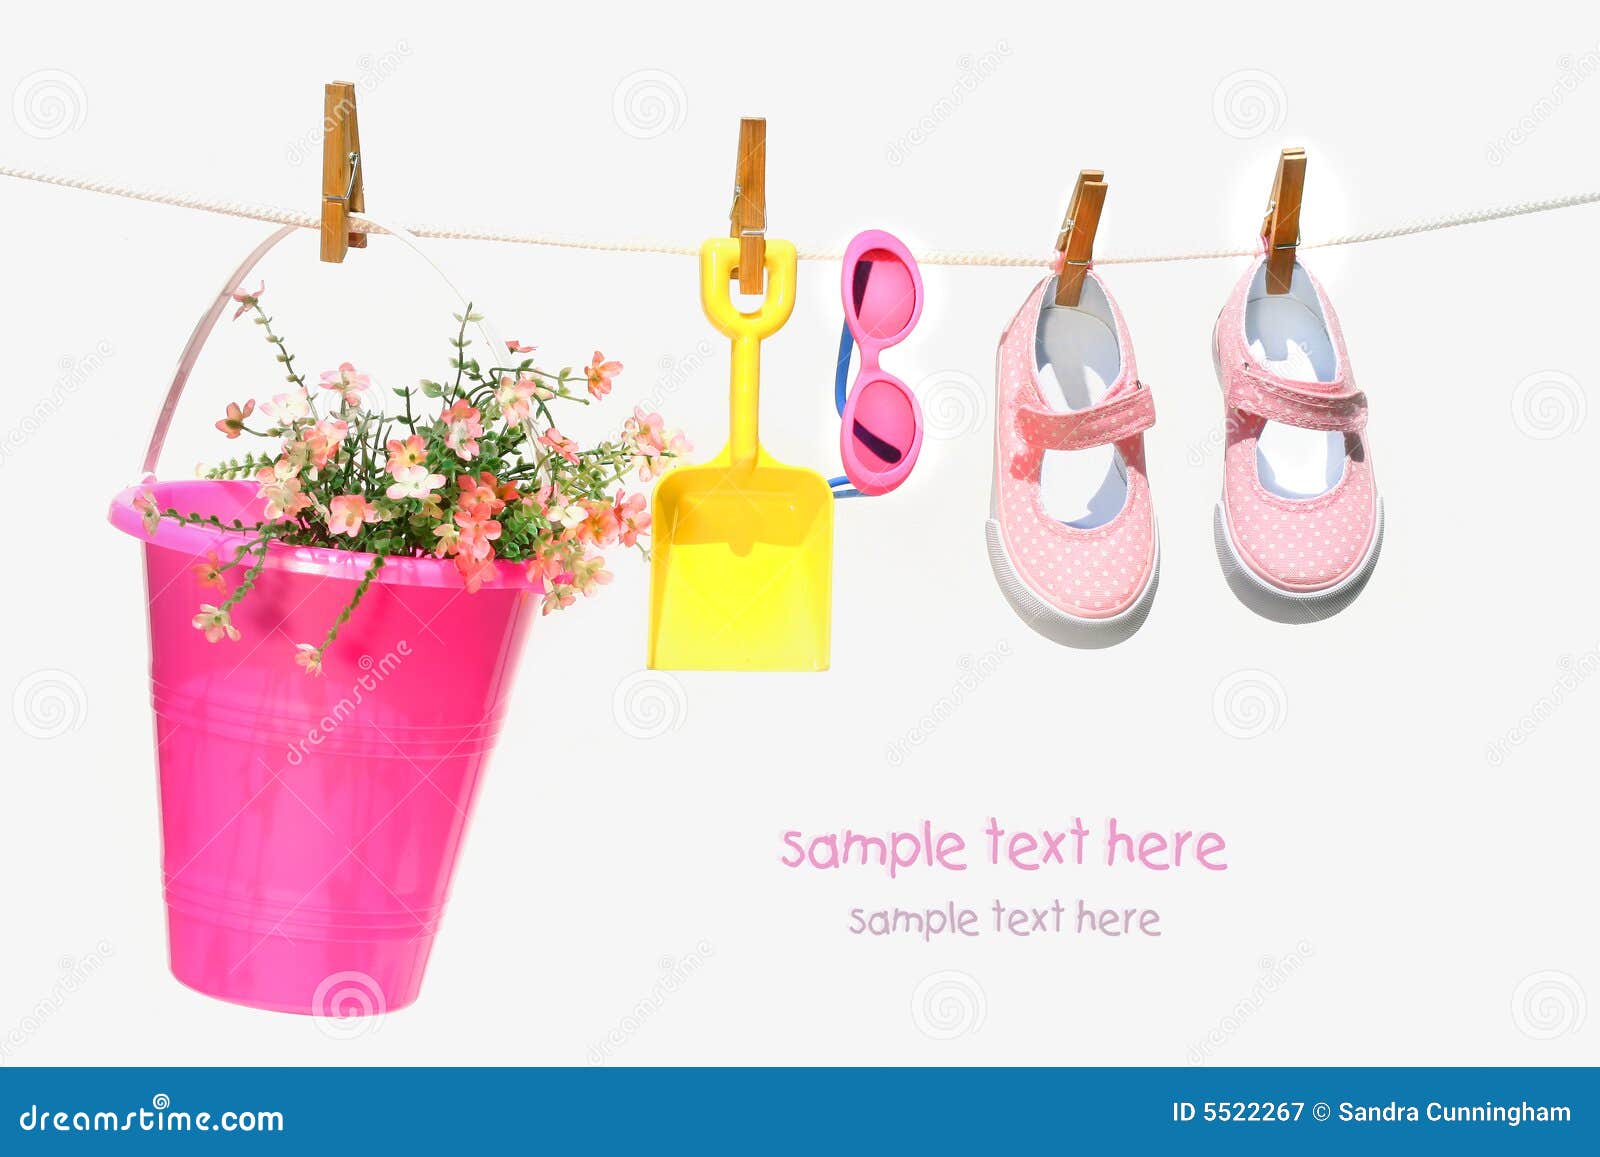 pail,sunglasses and shoes for child